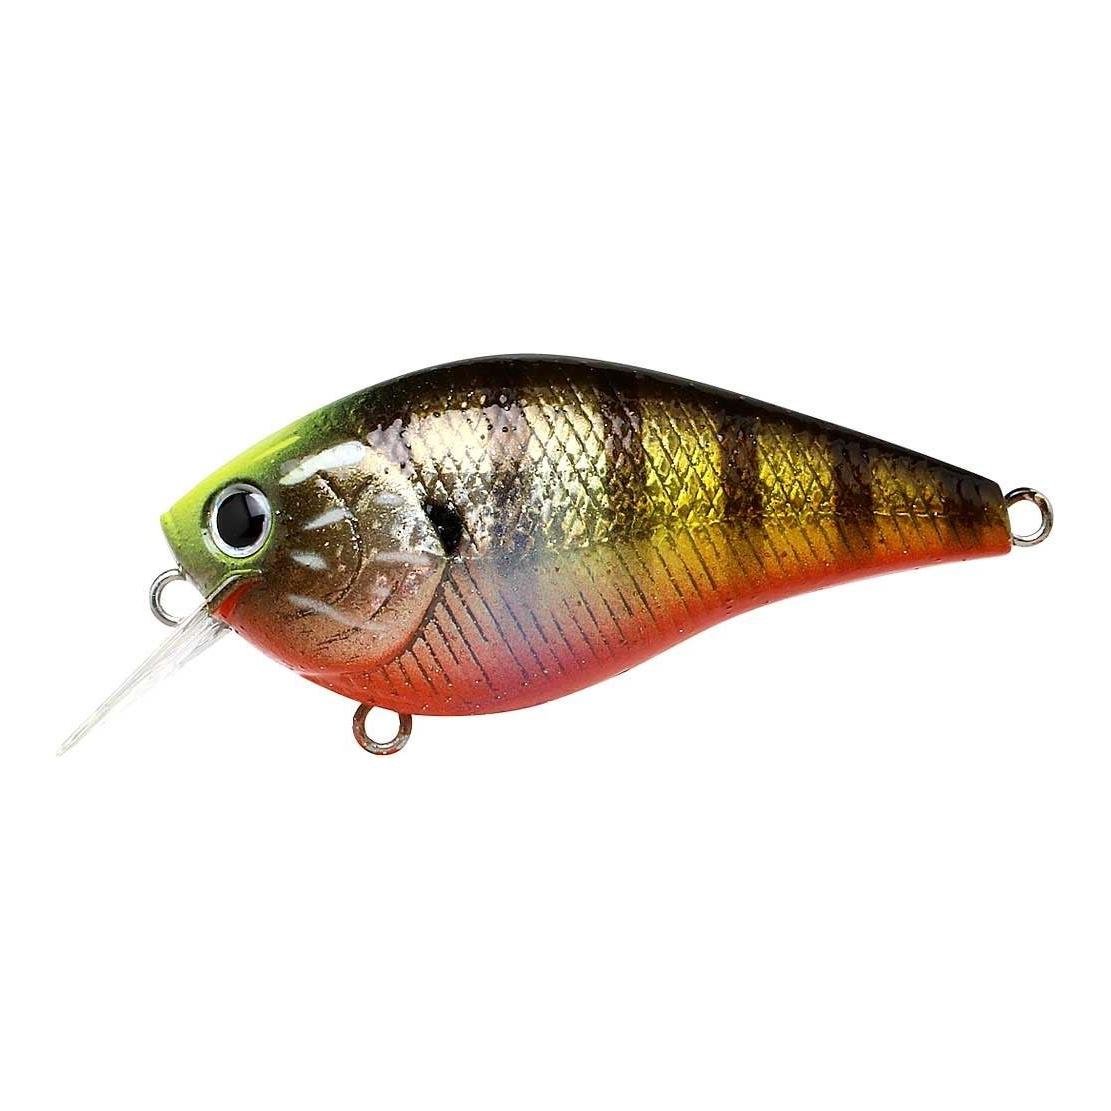 Lucky Craft LC 1.5 MS American Shad